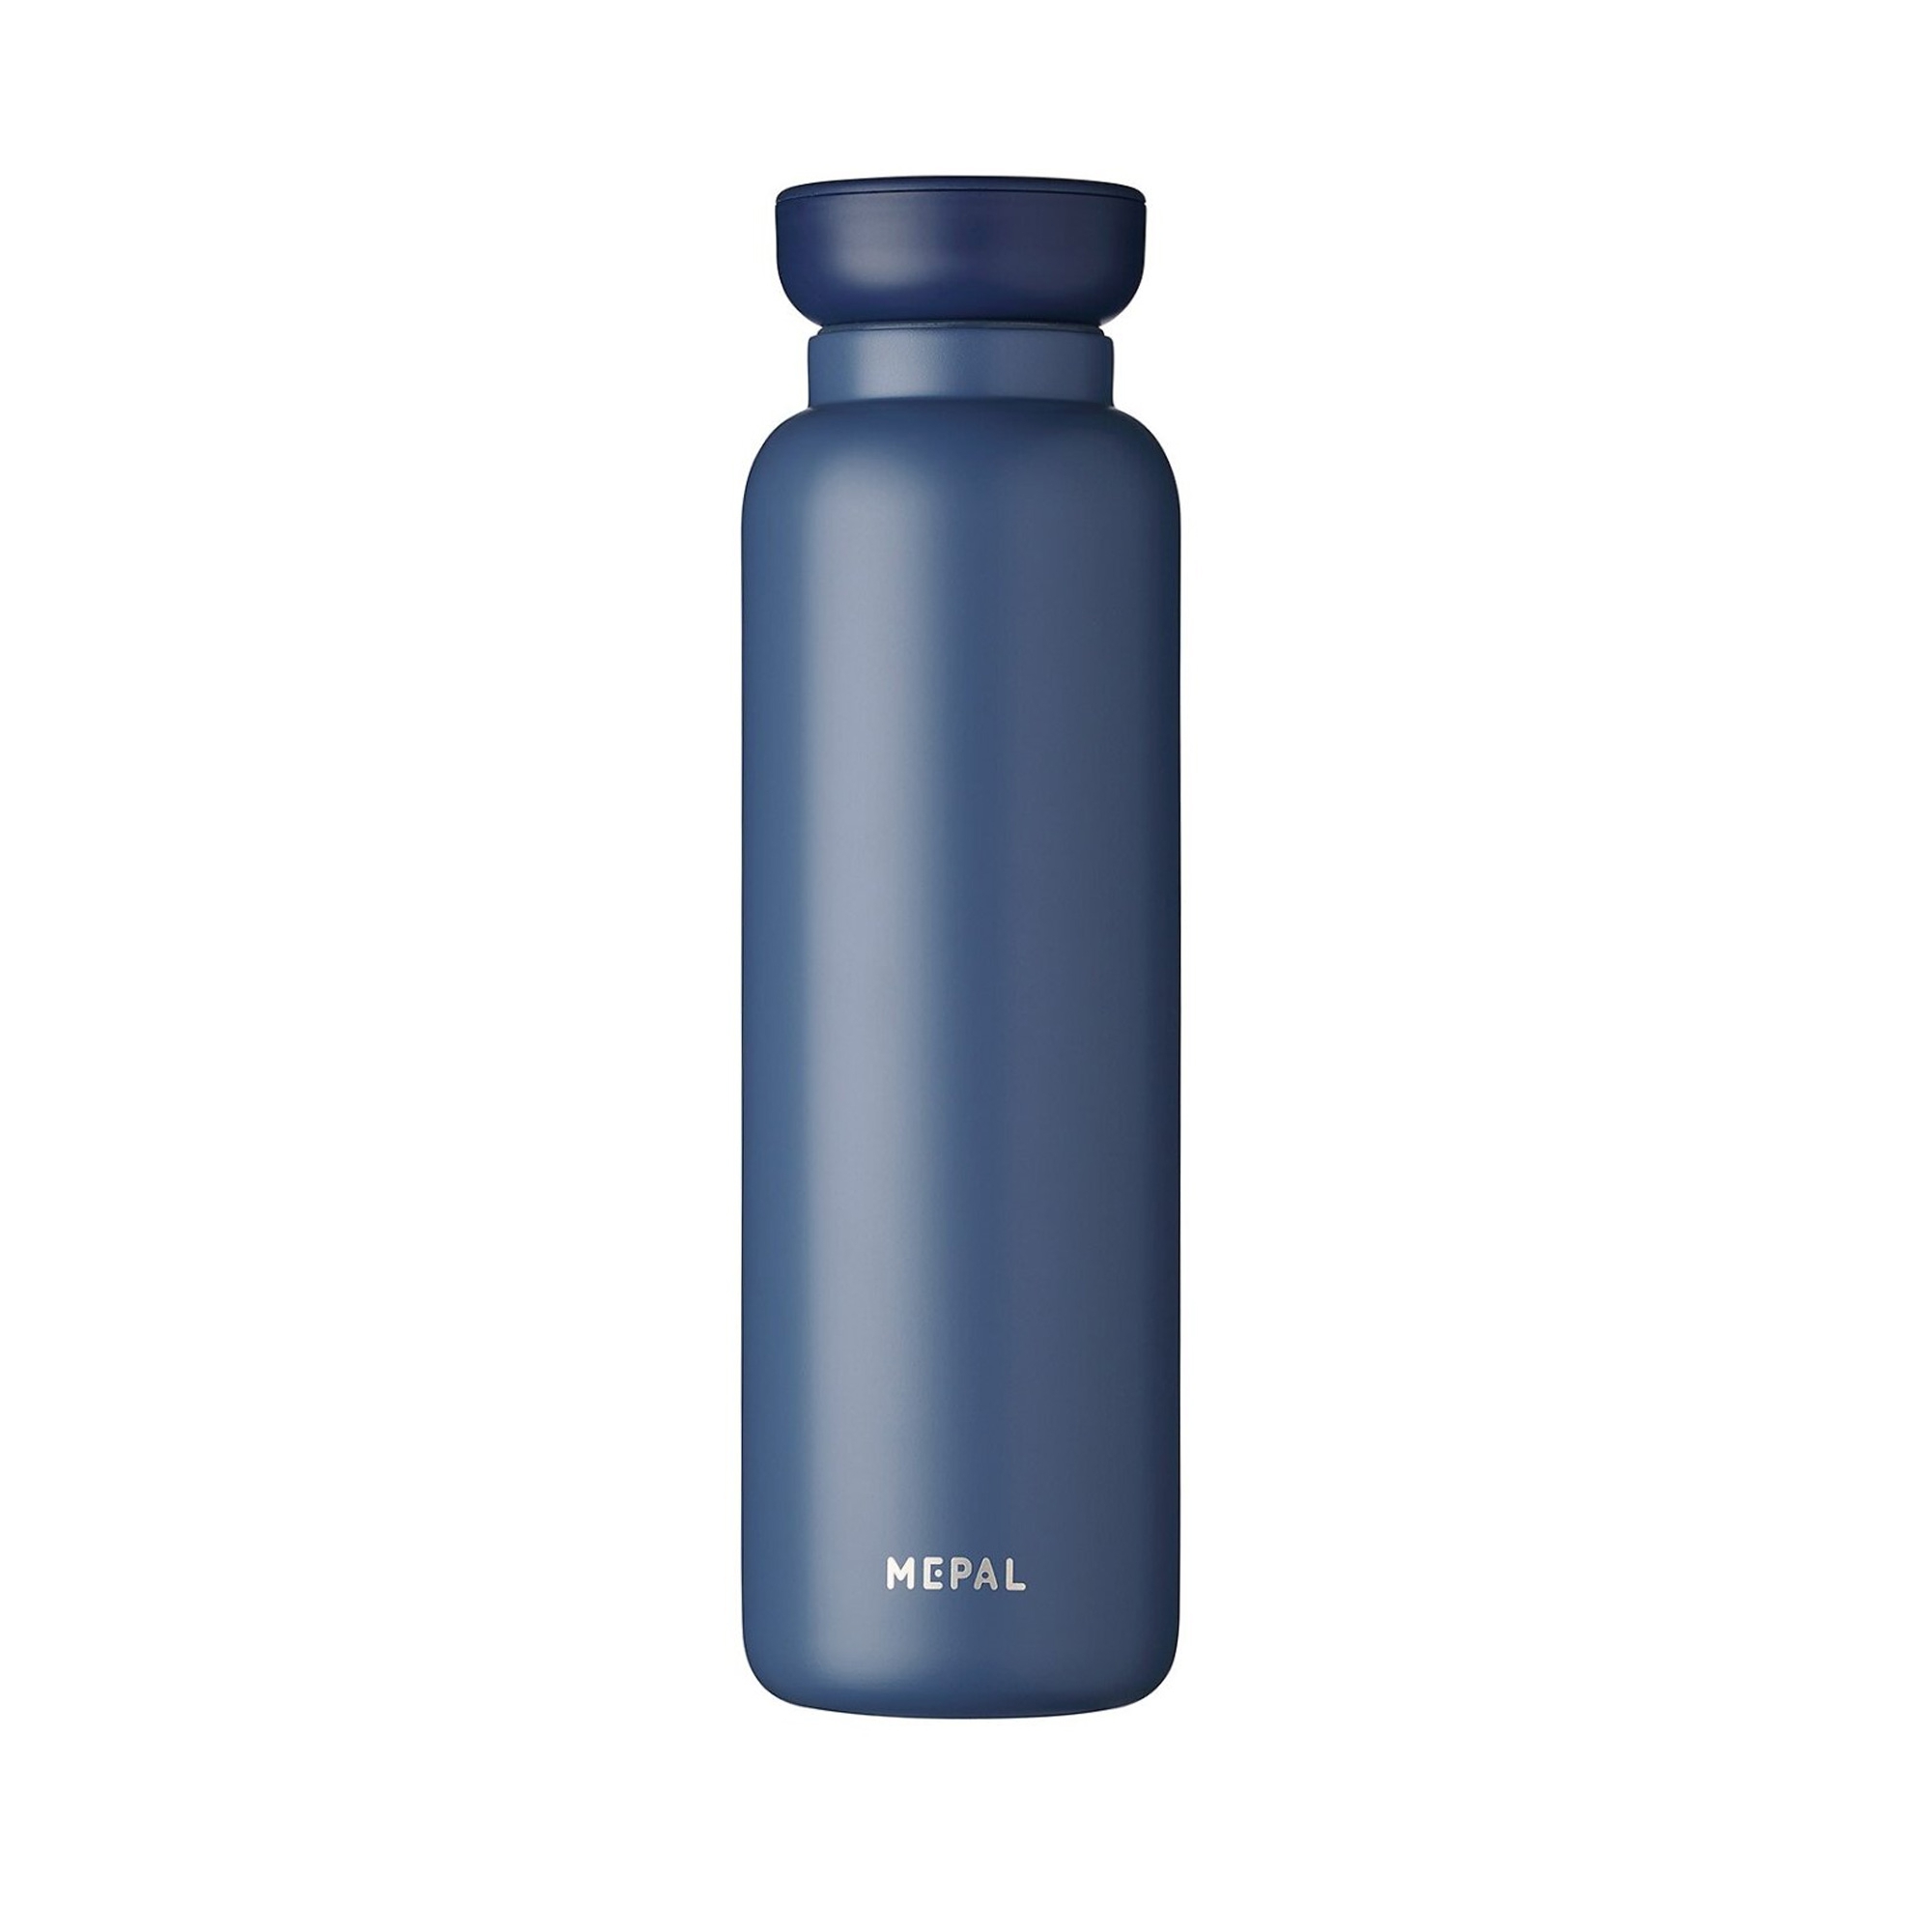 Mepal - Ellipse lid thermo bottle 900 ml - various colors